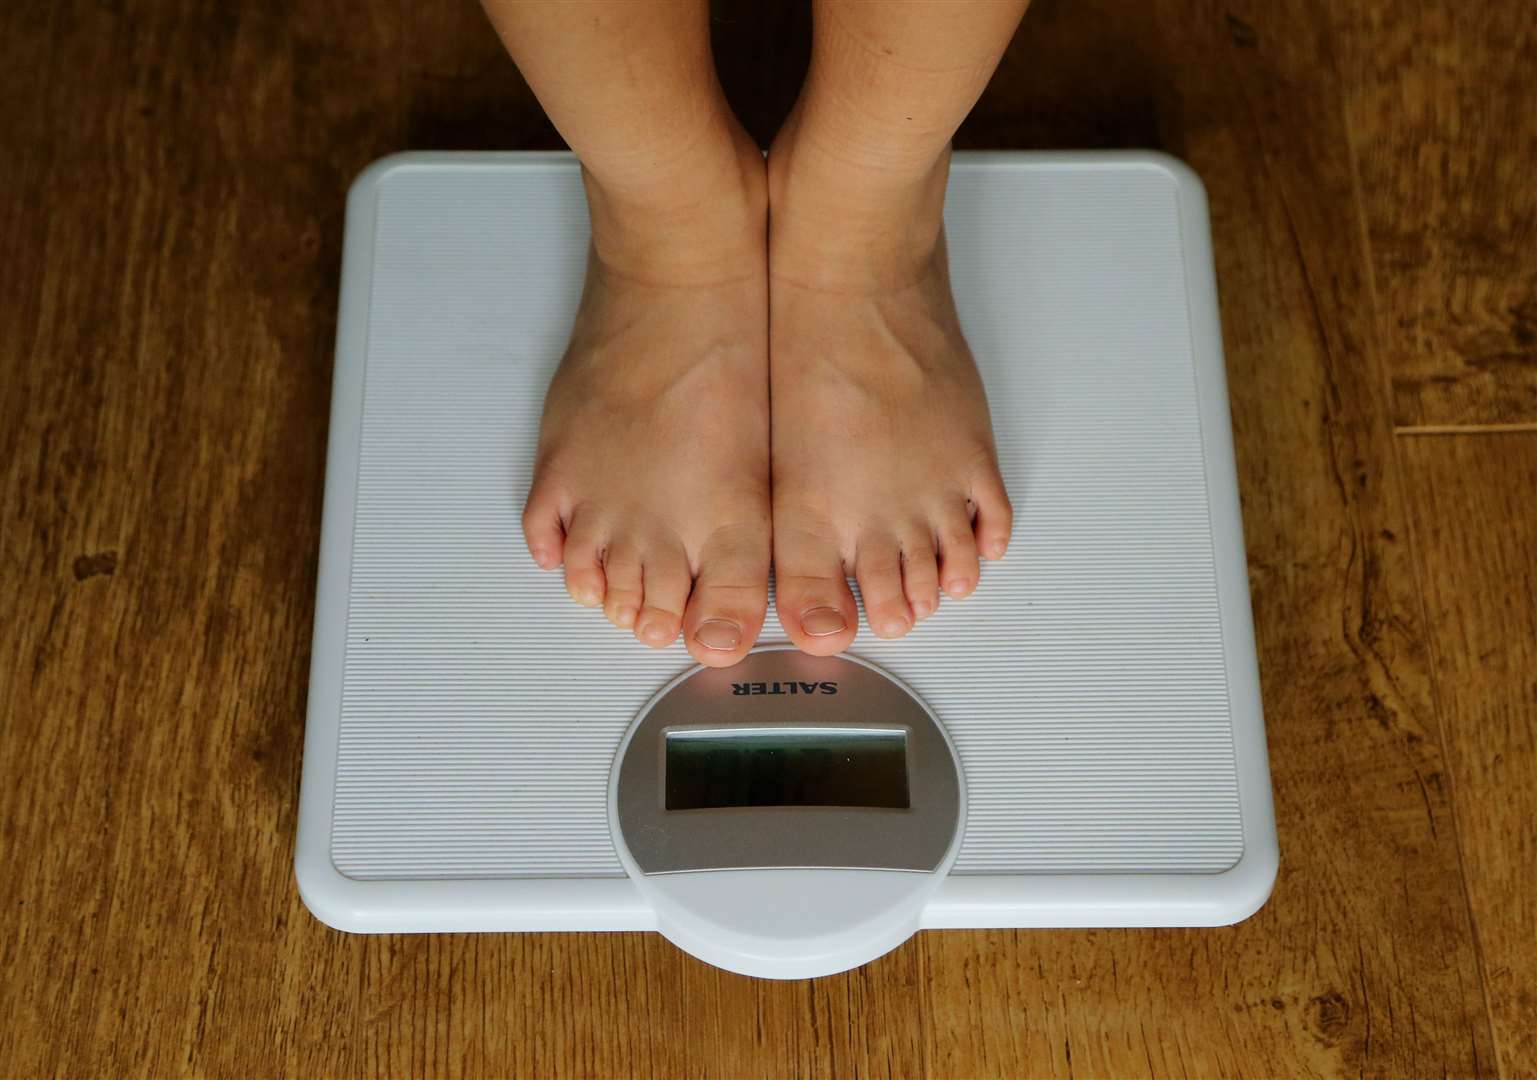 40% of 10 to 11-year-olds will be obese or overweight by 2030 if the current trend continues